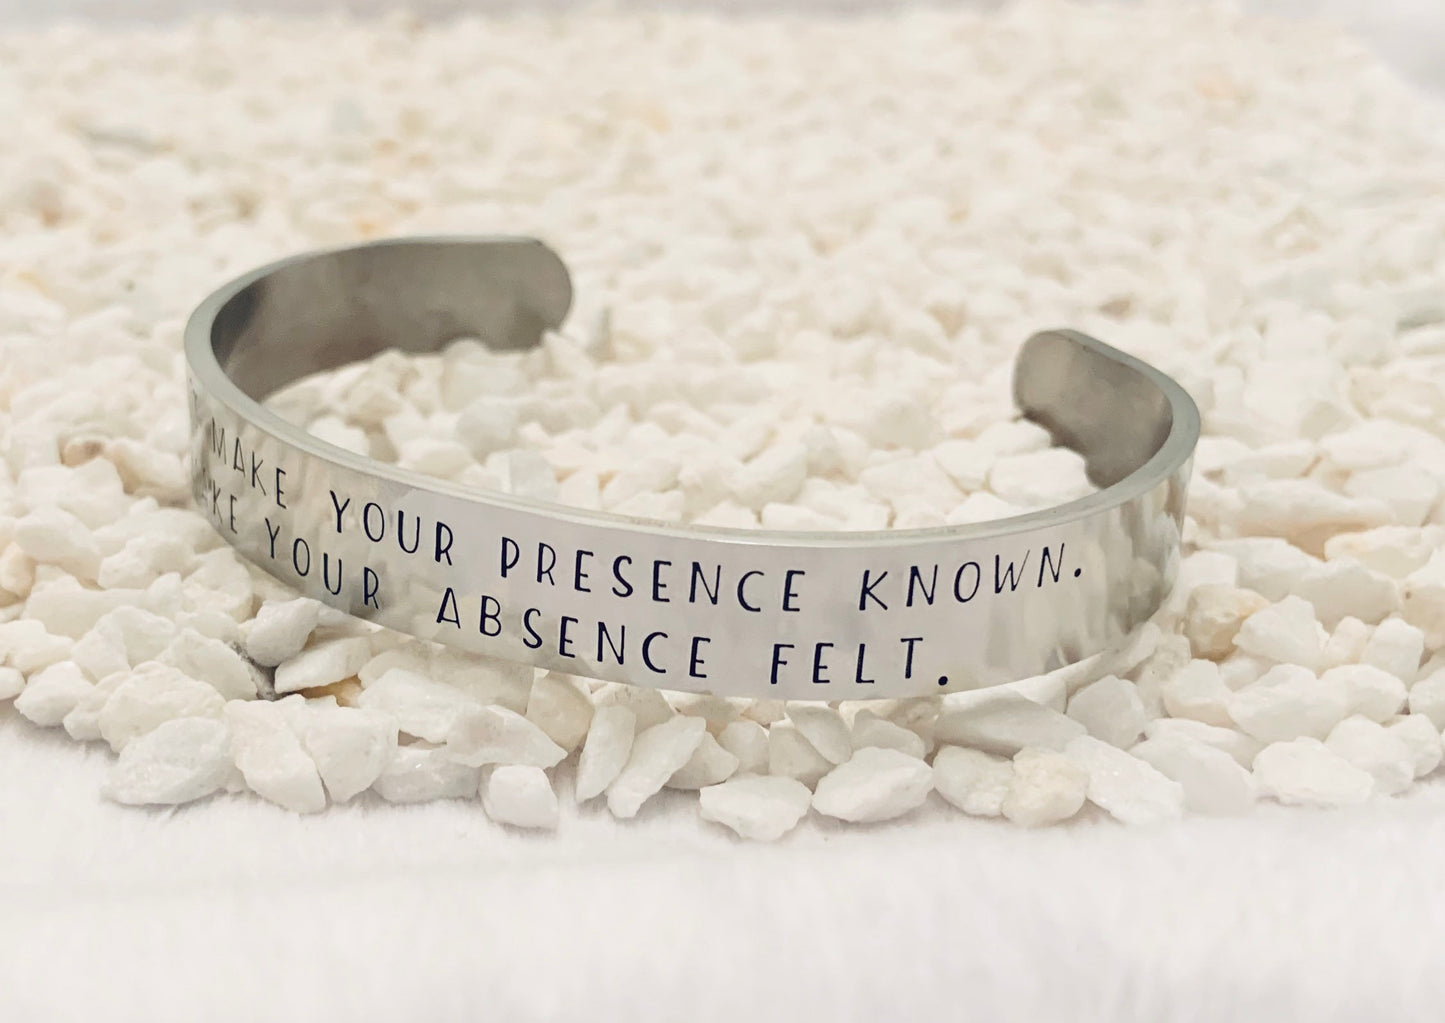 Don't make your presence known. Make your absence felt. (Colleen Hoover) - Cuff Bracelet